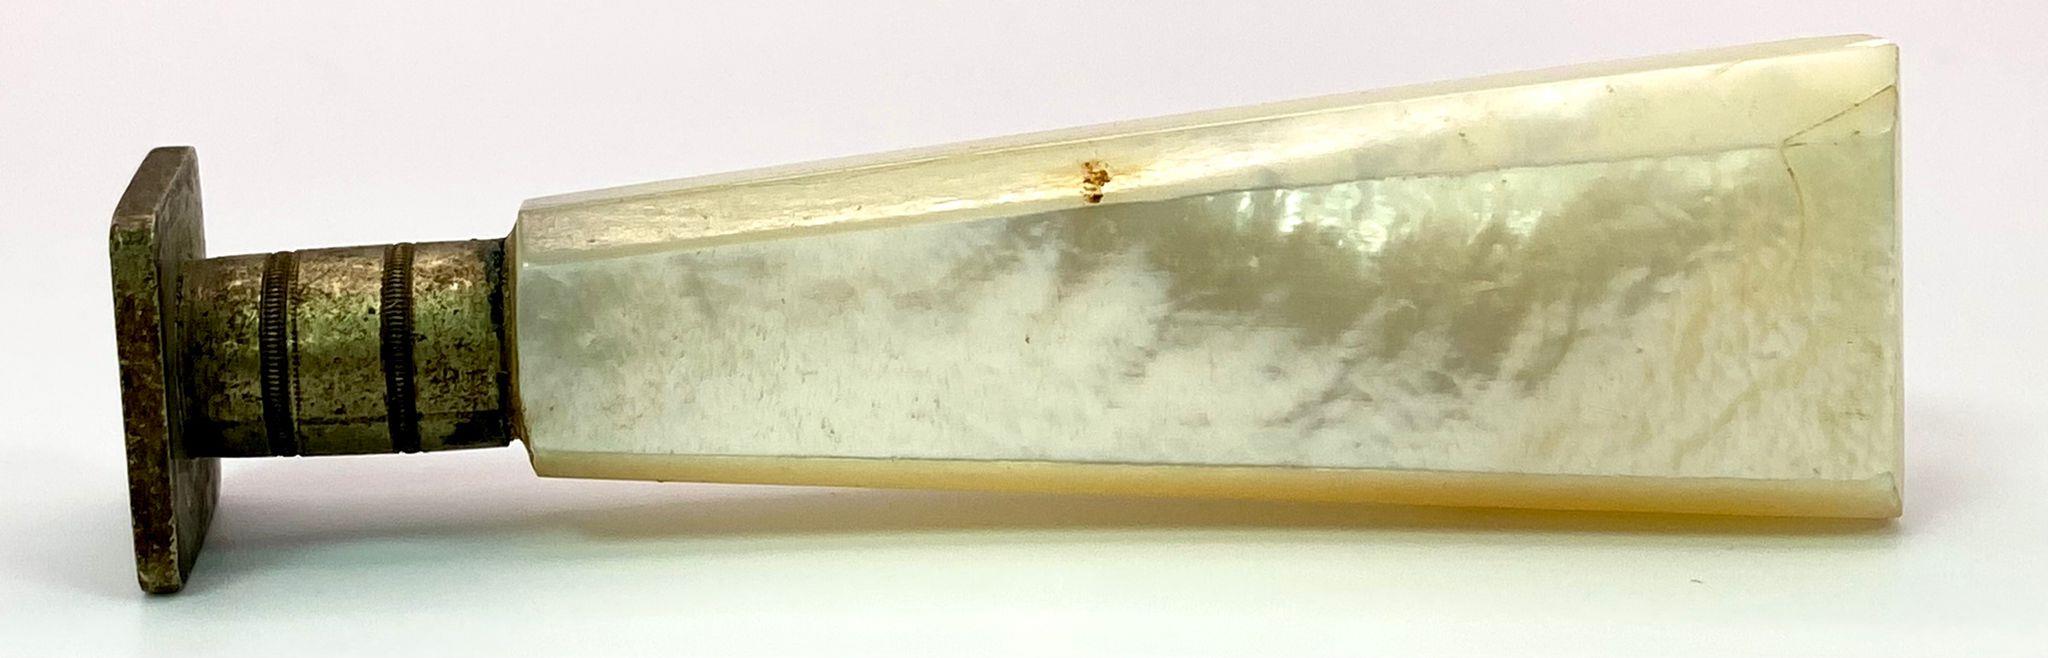 An Excellent Condition 19th Century Antique Opalite/Agate Brass Seal. Size: 8cm - Image 2 of 4